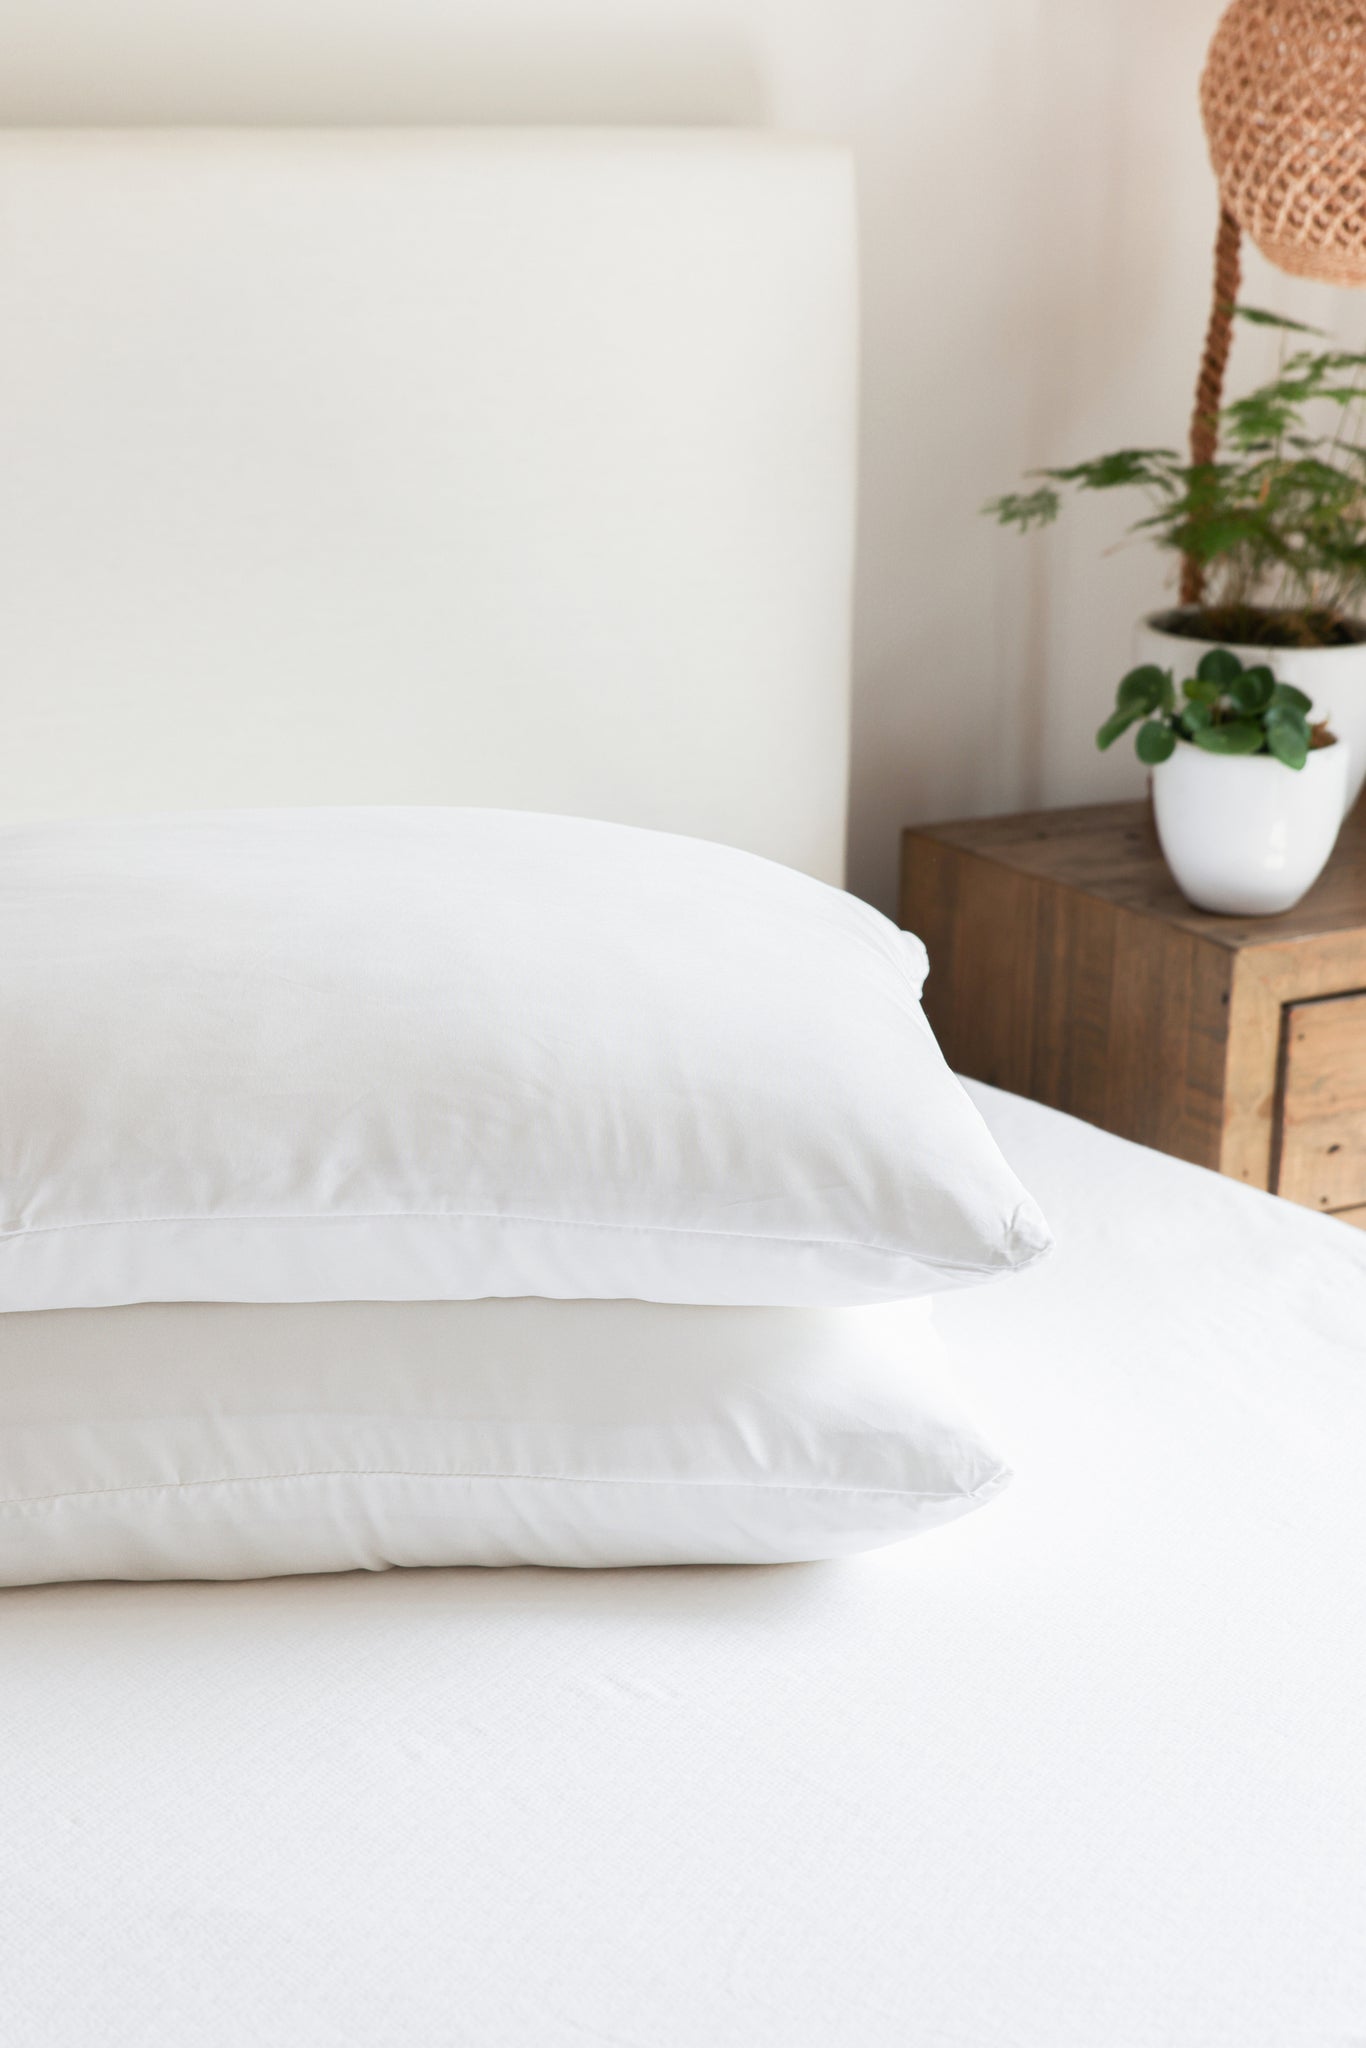 A pristine white pillow protected by the Hypoallergenic Pillow Protector